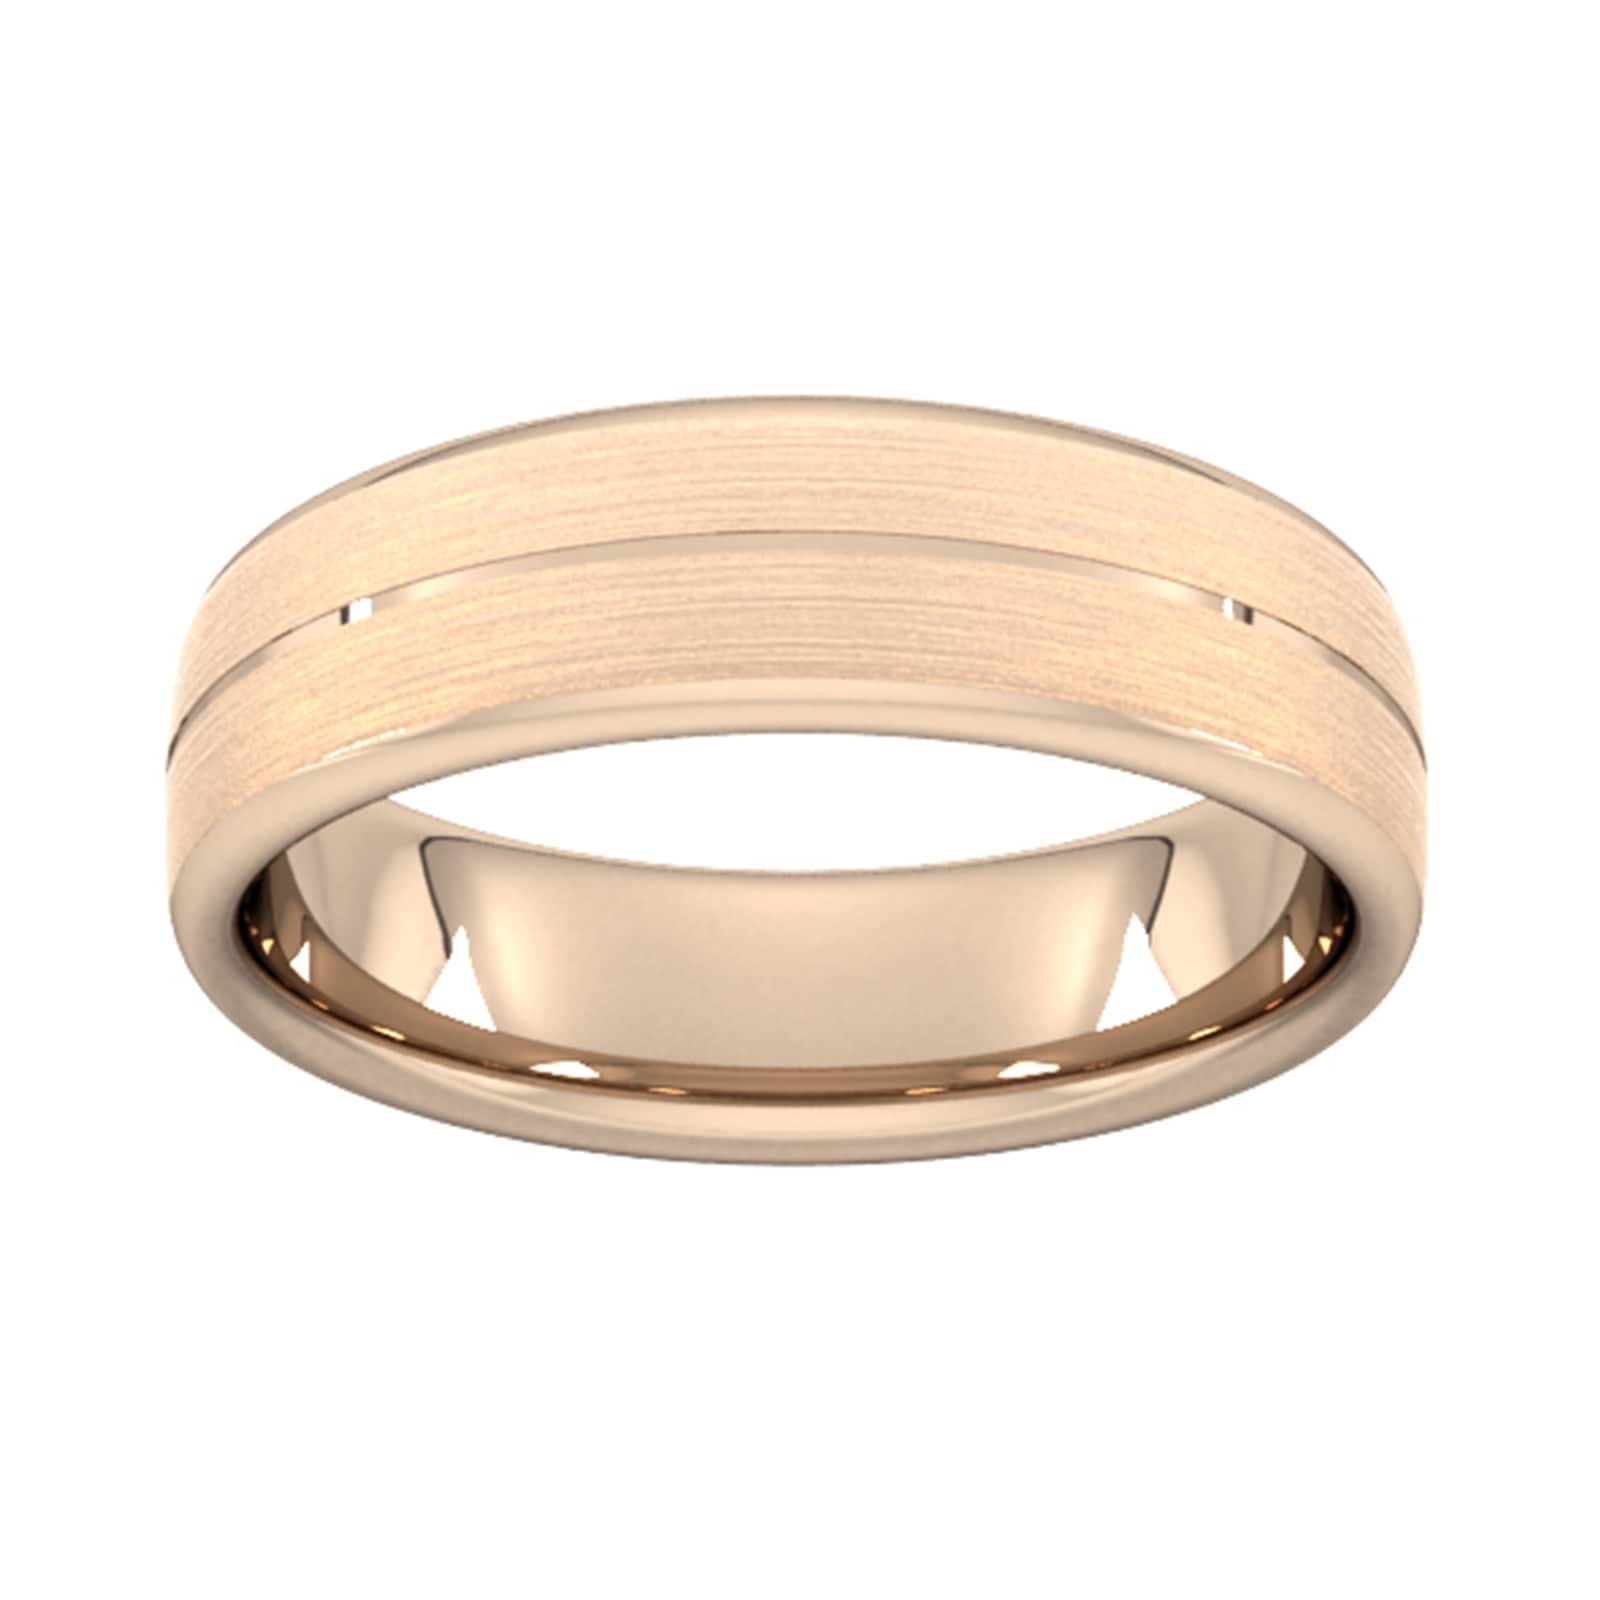 6mm D Shape Heavy Centre Groove With Chamfered Edge Wedding Ring In 18 Carat Rose Gold - Ring Size W